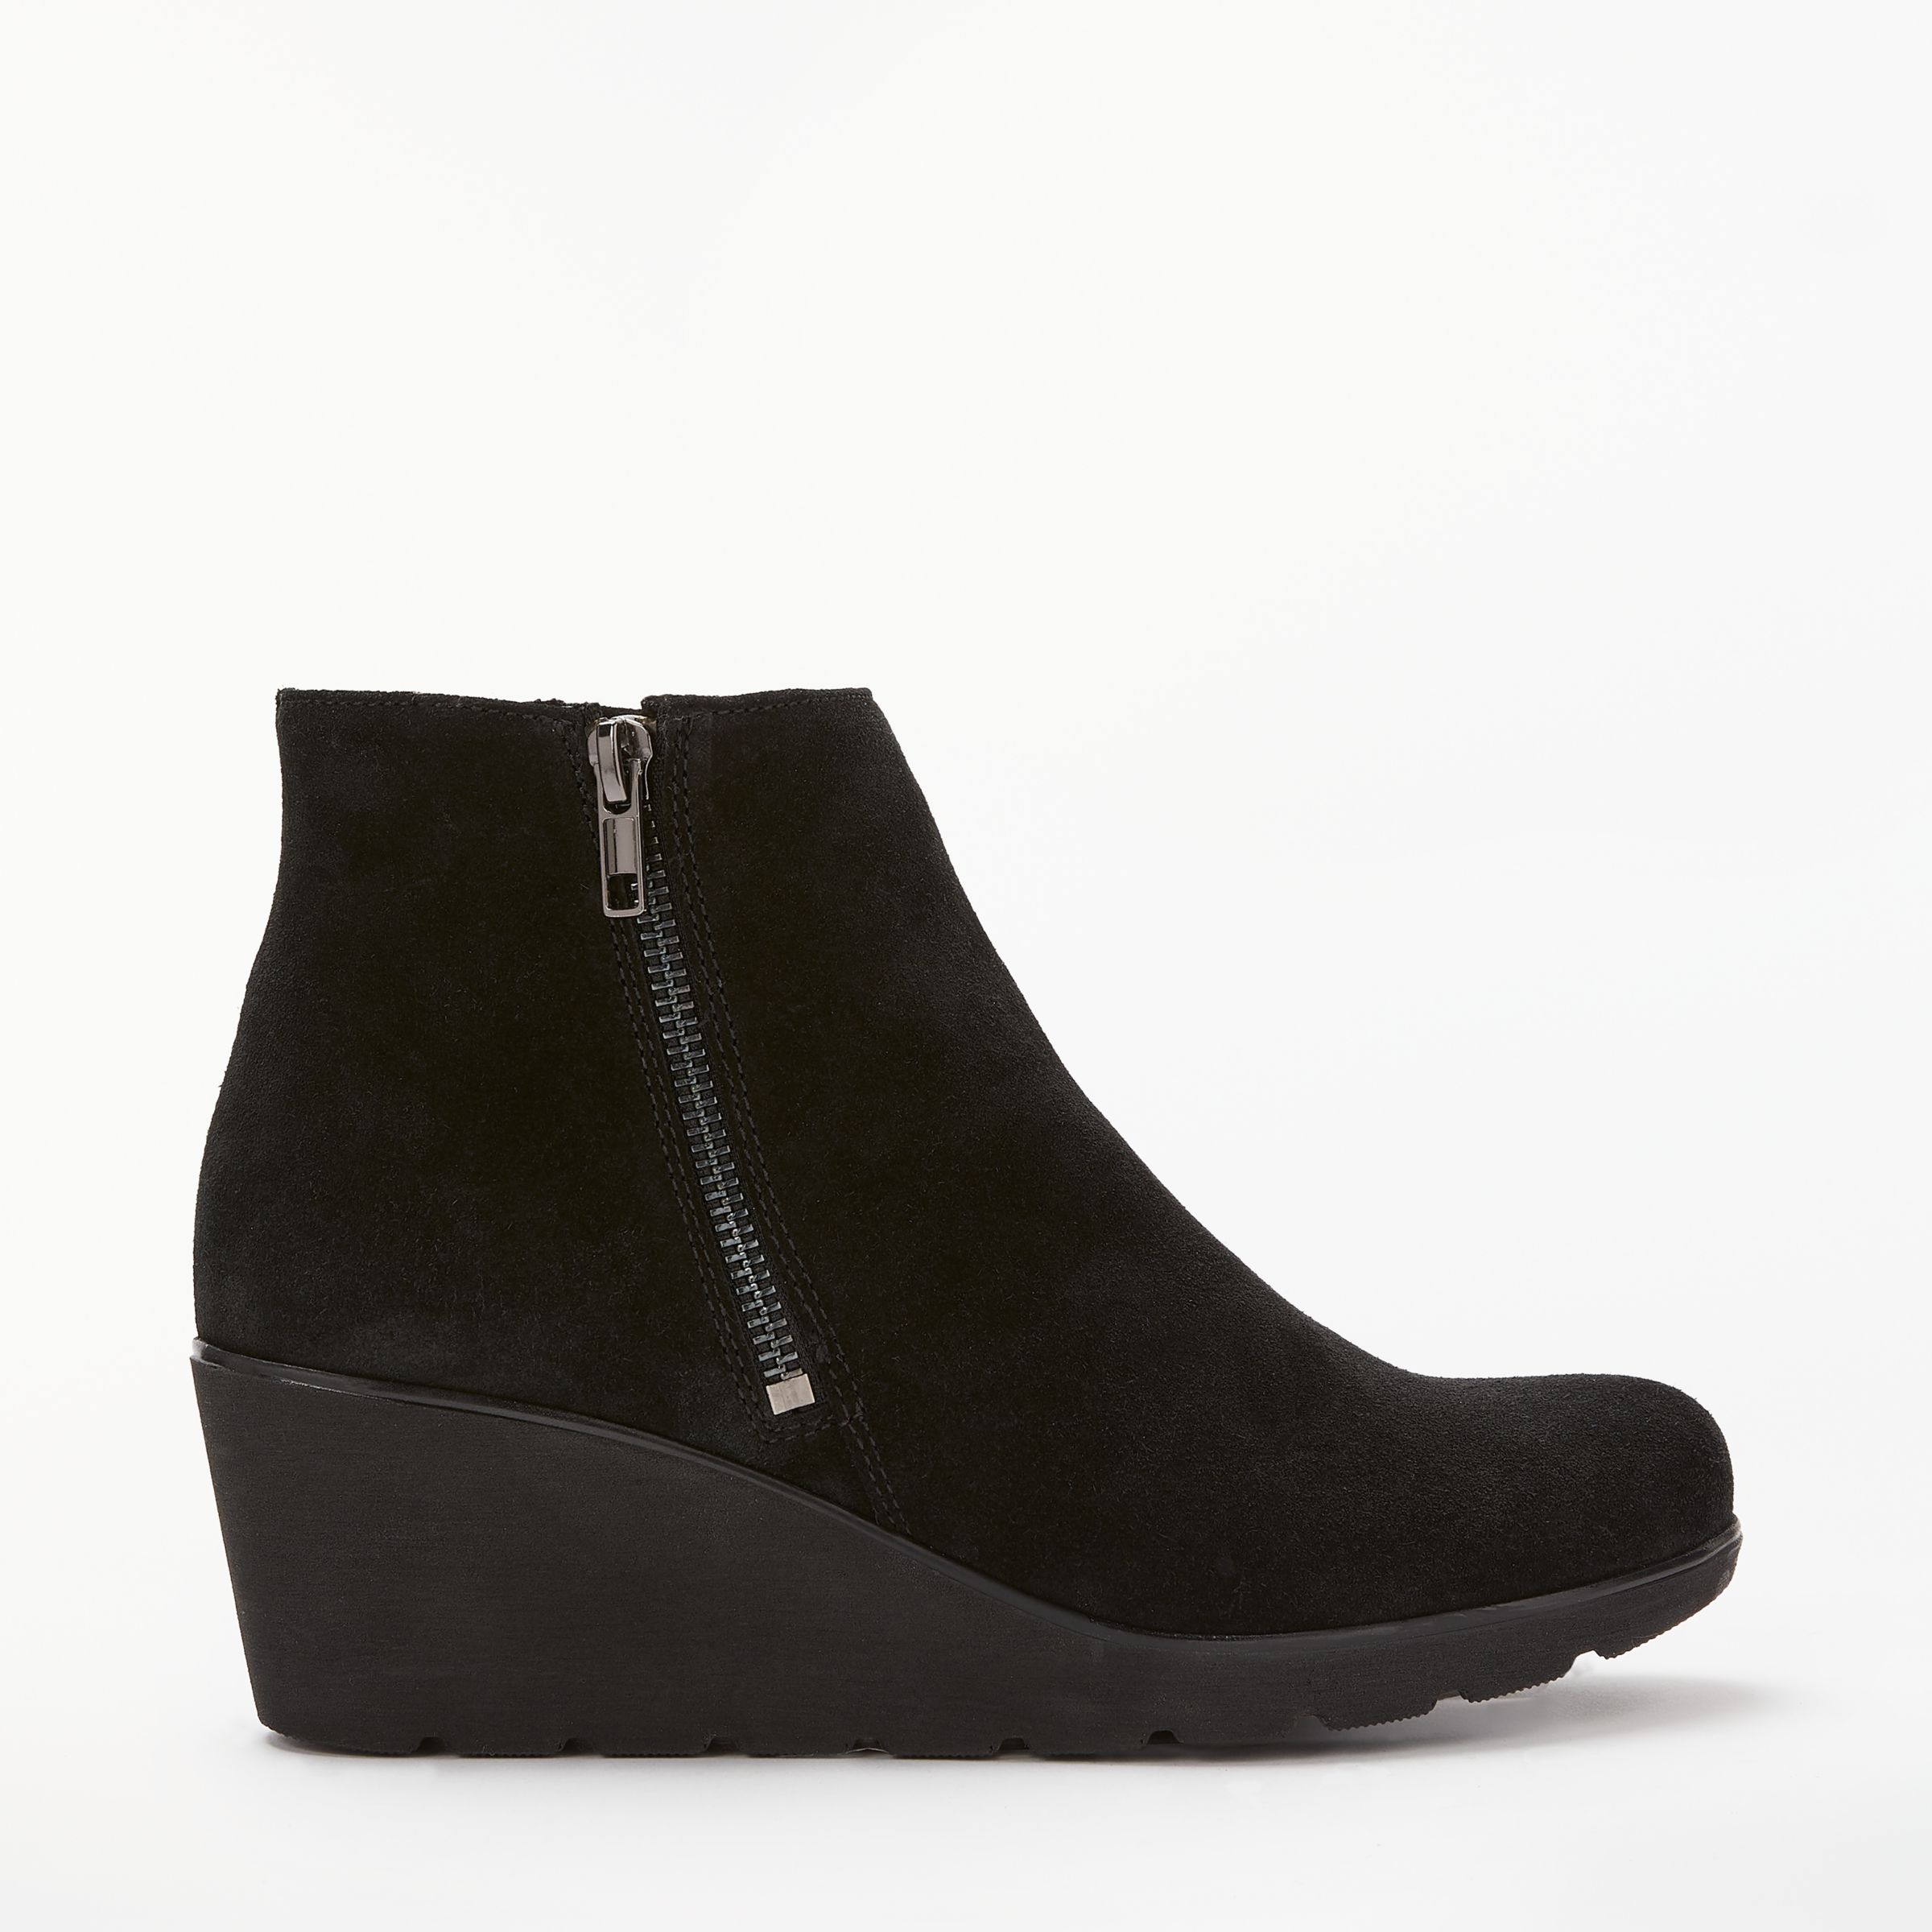 suede wedge ankle boots